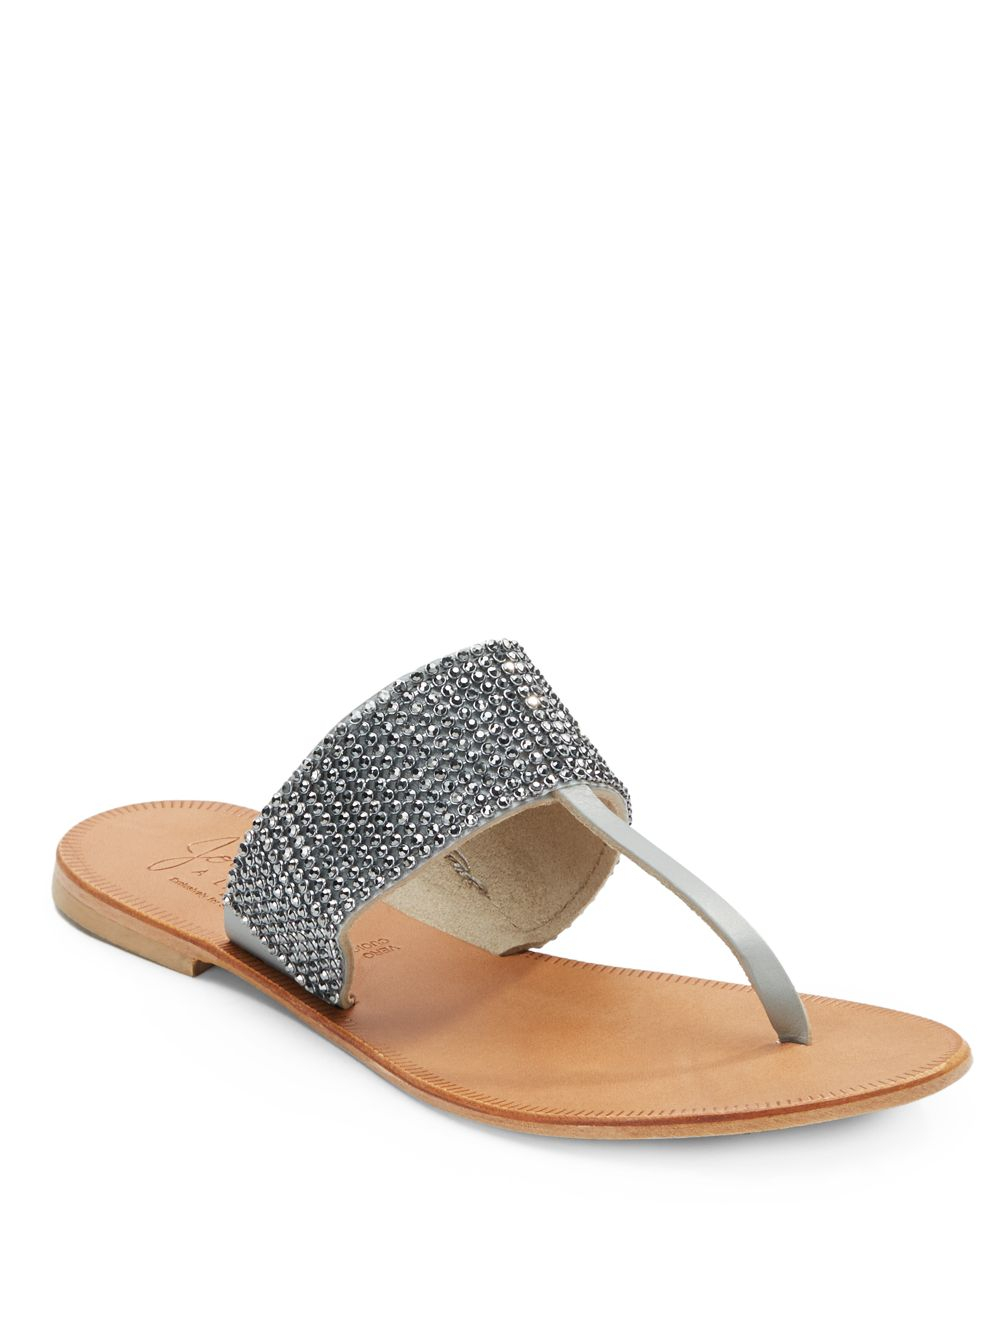 Joie Rhinestone-Embellished Leather Thong Sandals in Silver | Lyst